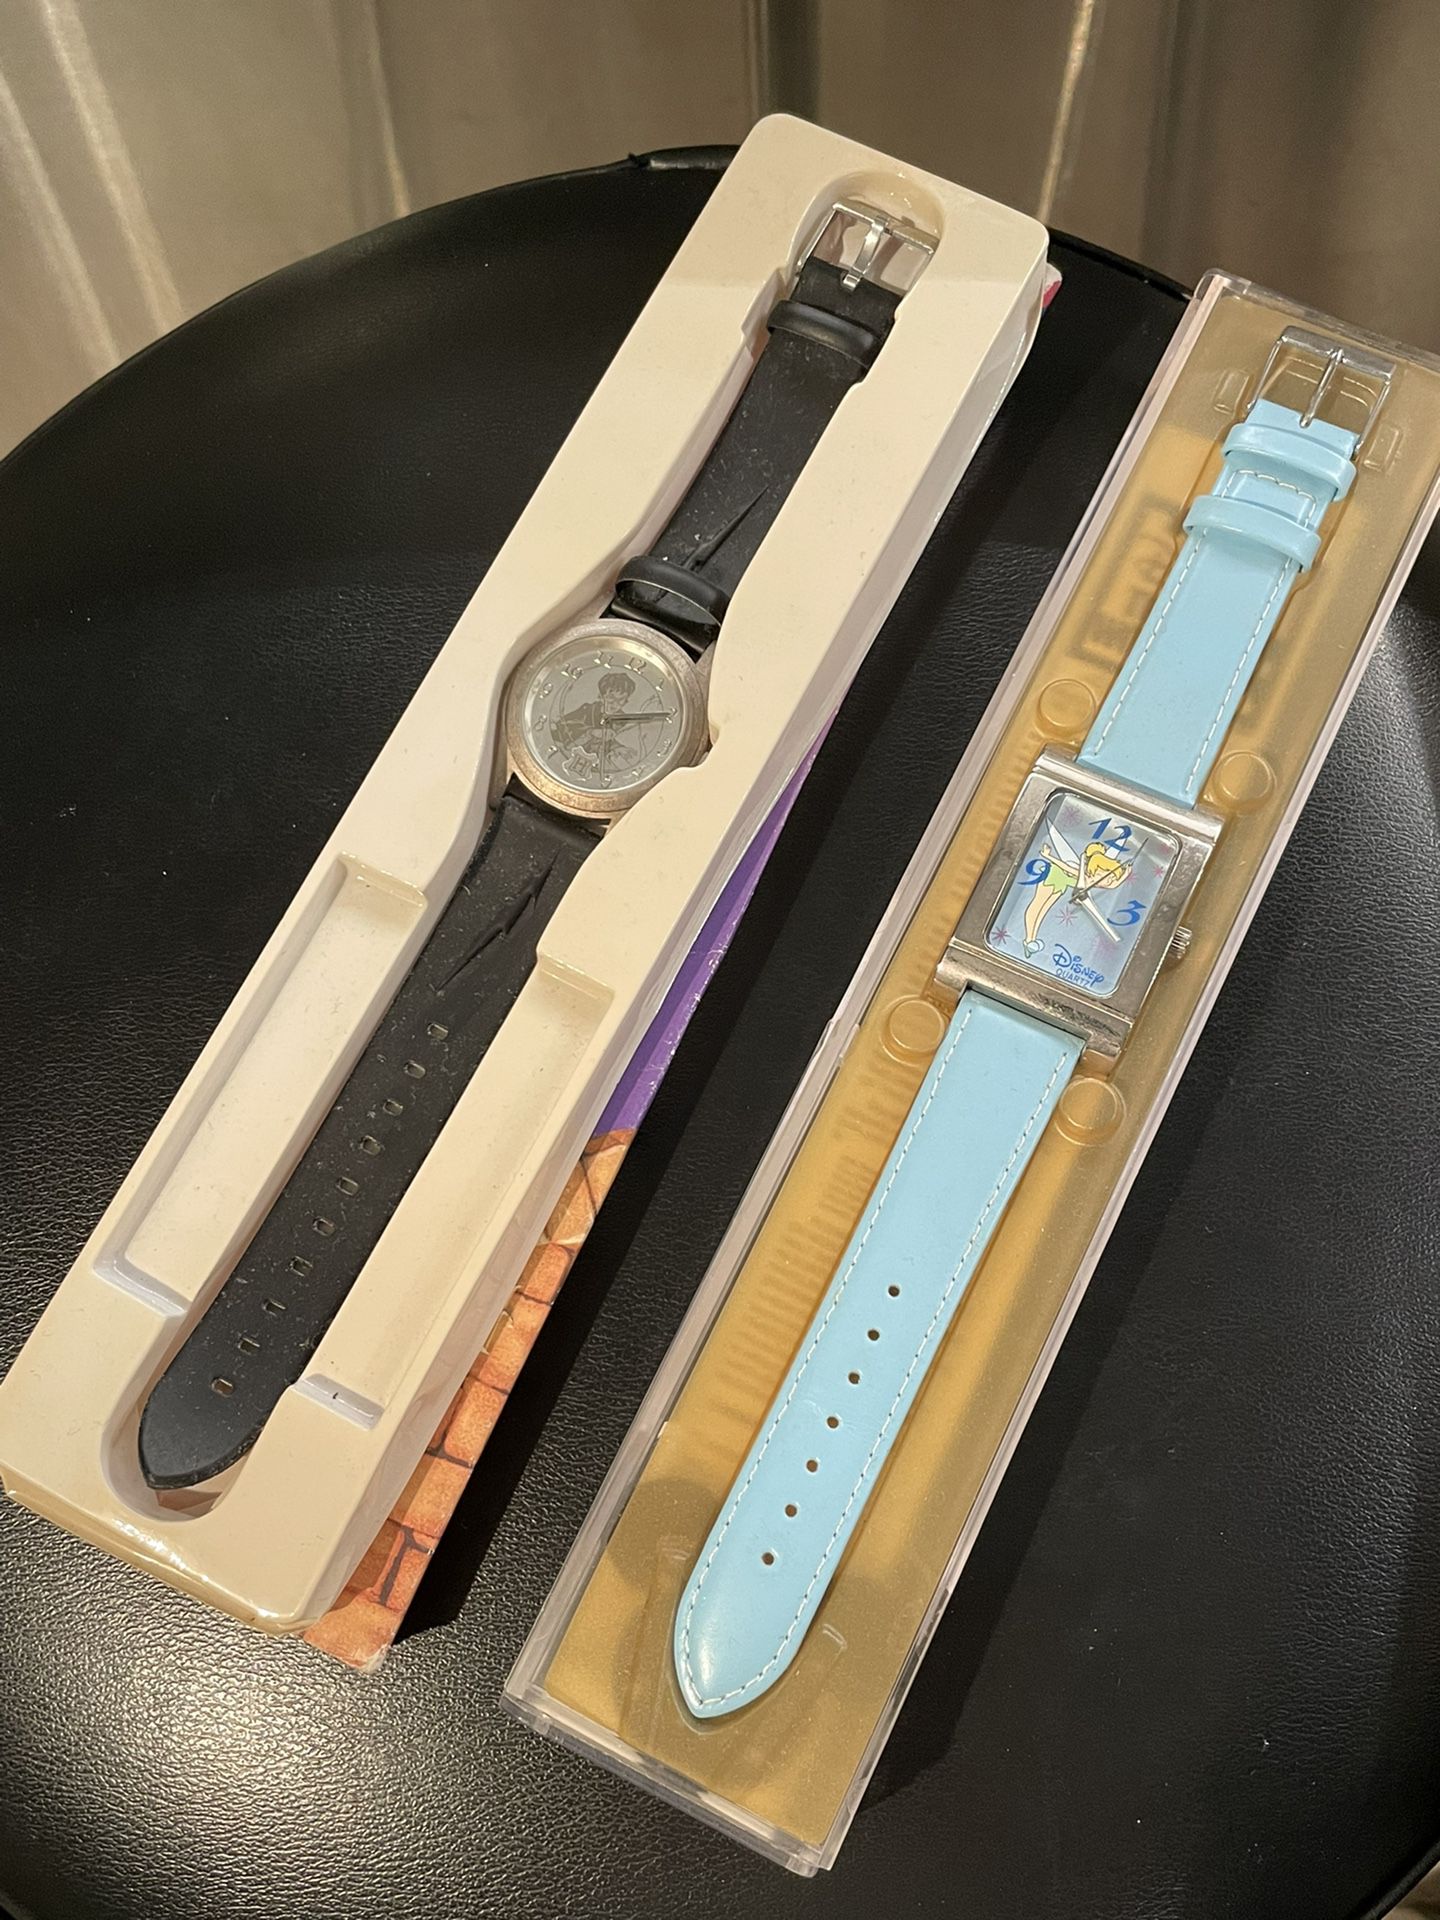 Disney Tinker Bell and Harry Potter watches